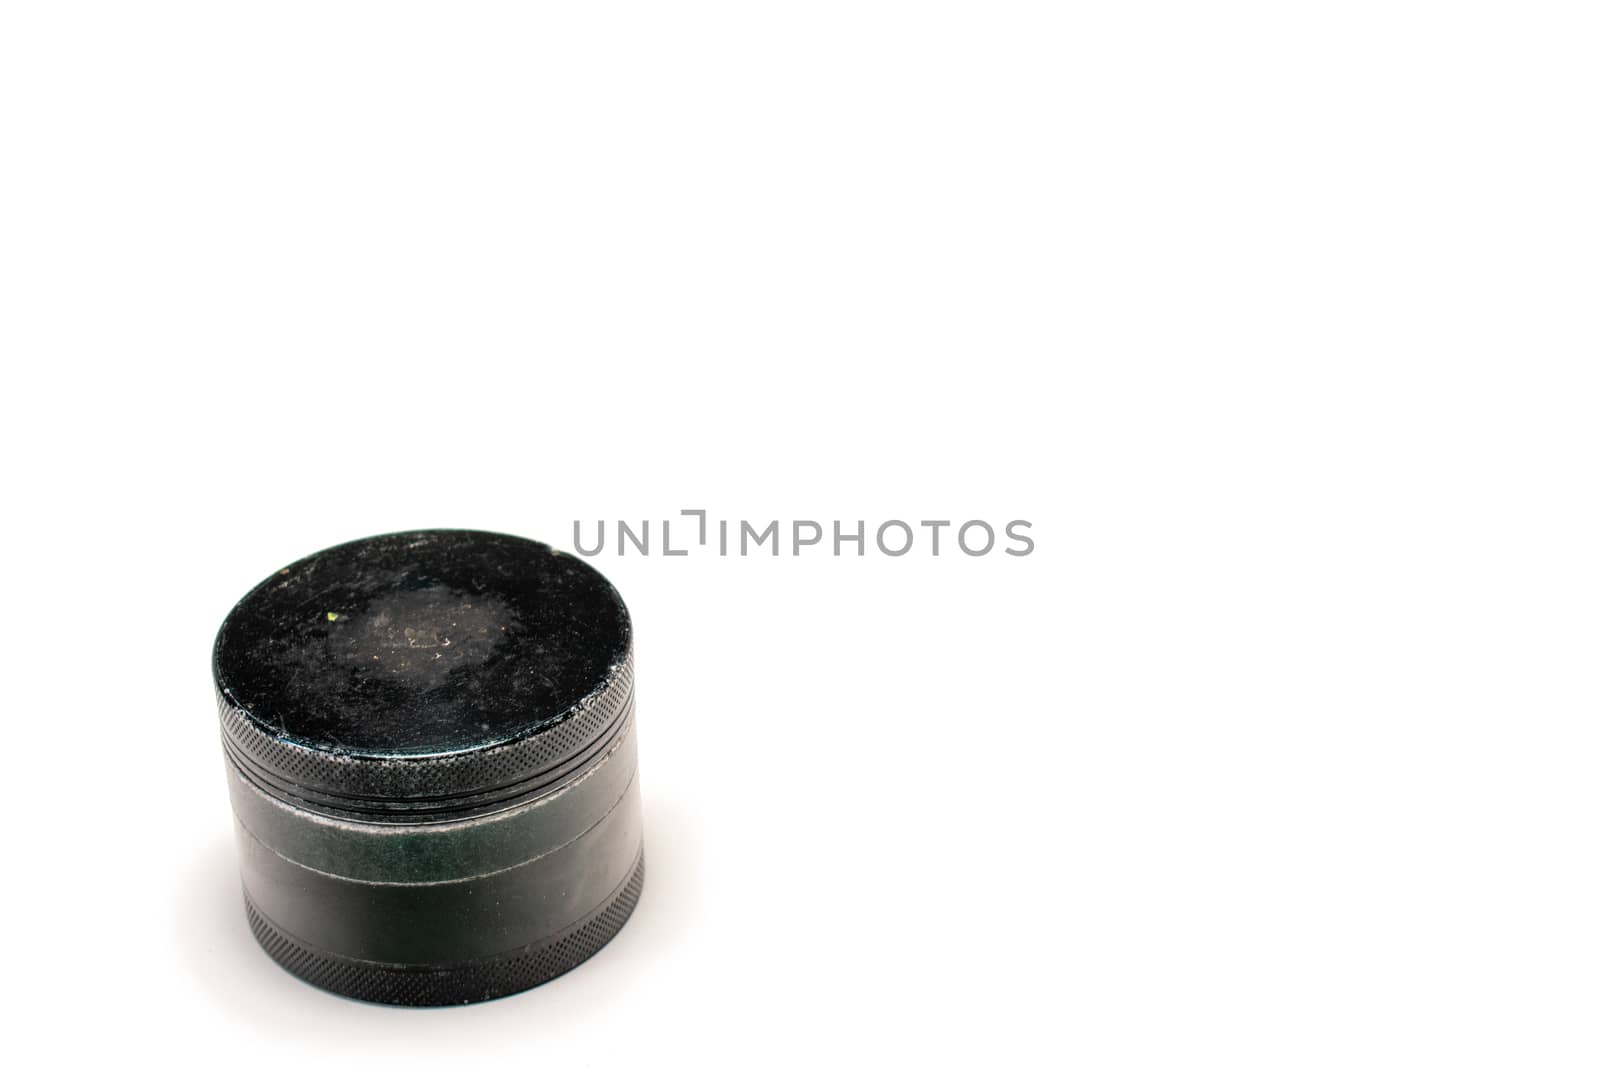 A Used Black Cannabis Grinder With the Lid On Top by bju12290